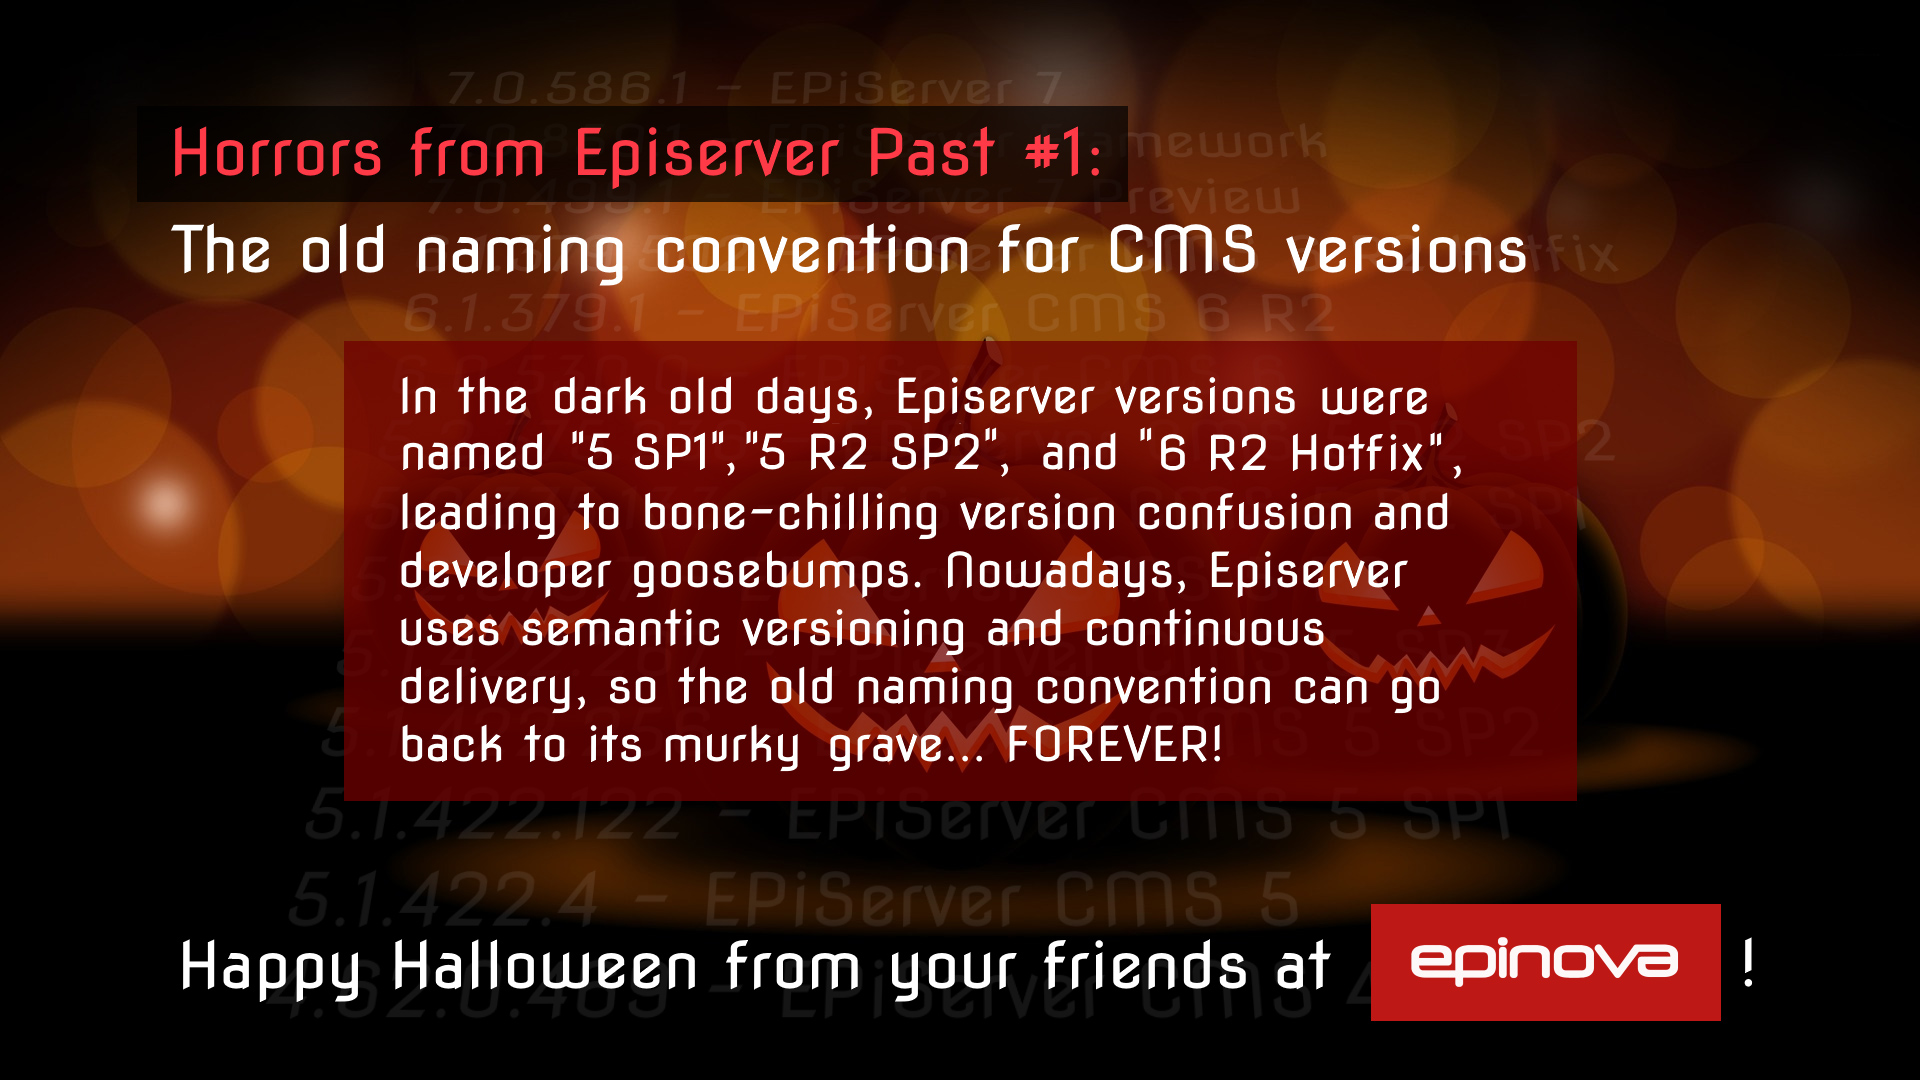 Humorous Halloween throwback at Episerver's old naming convention